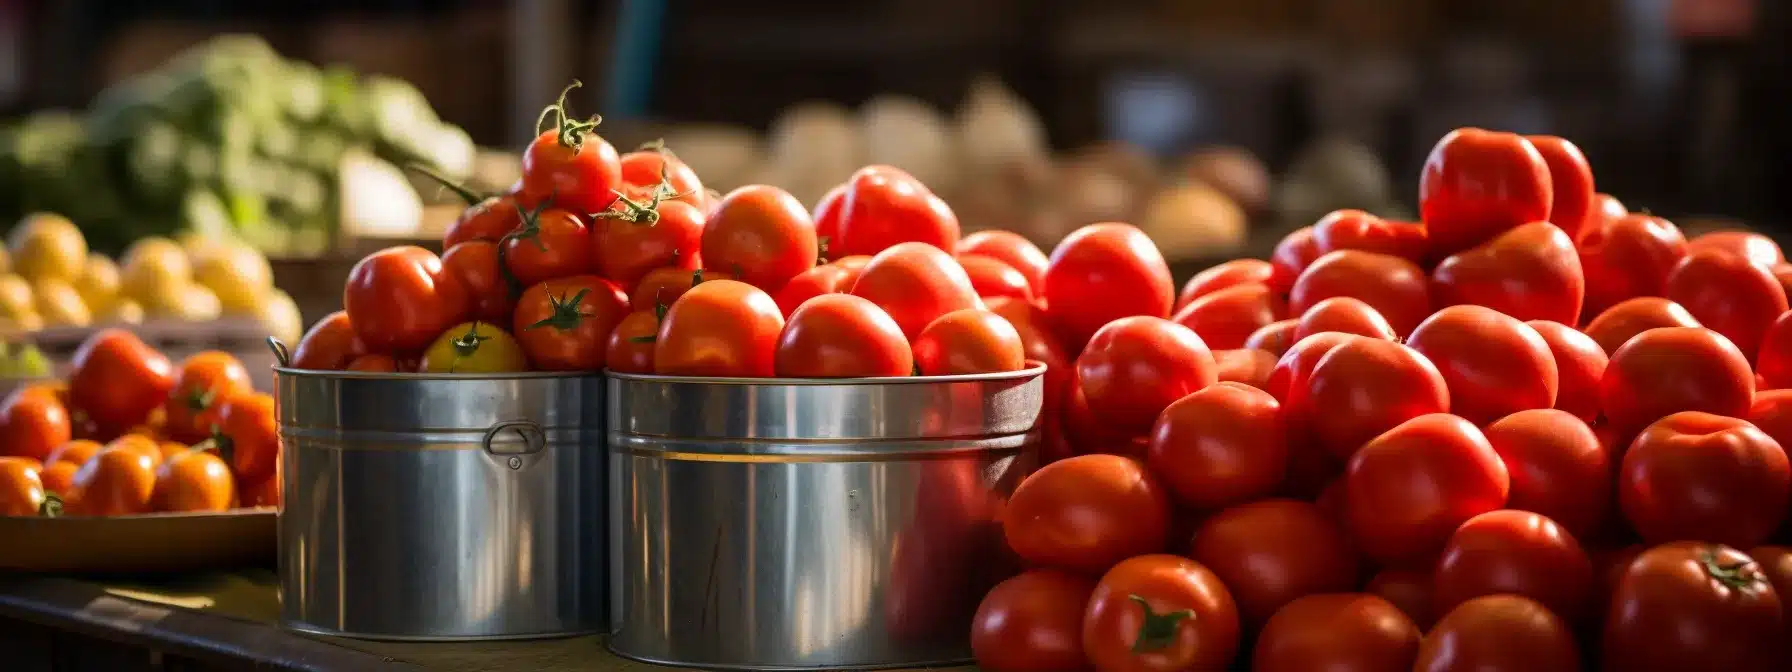 A Bustling Farmers Market With A Homegrown, Organically-Sourced Tomato Standing Out Among Factory-Processed Cans.